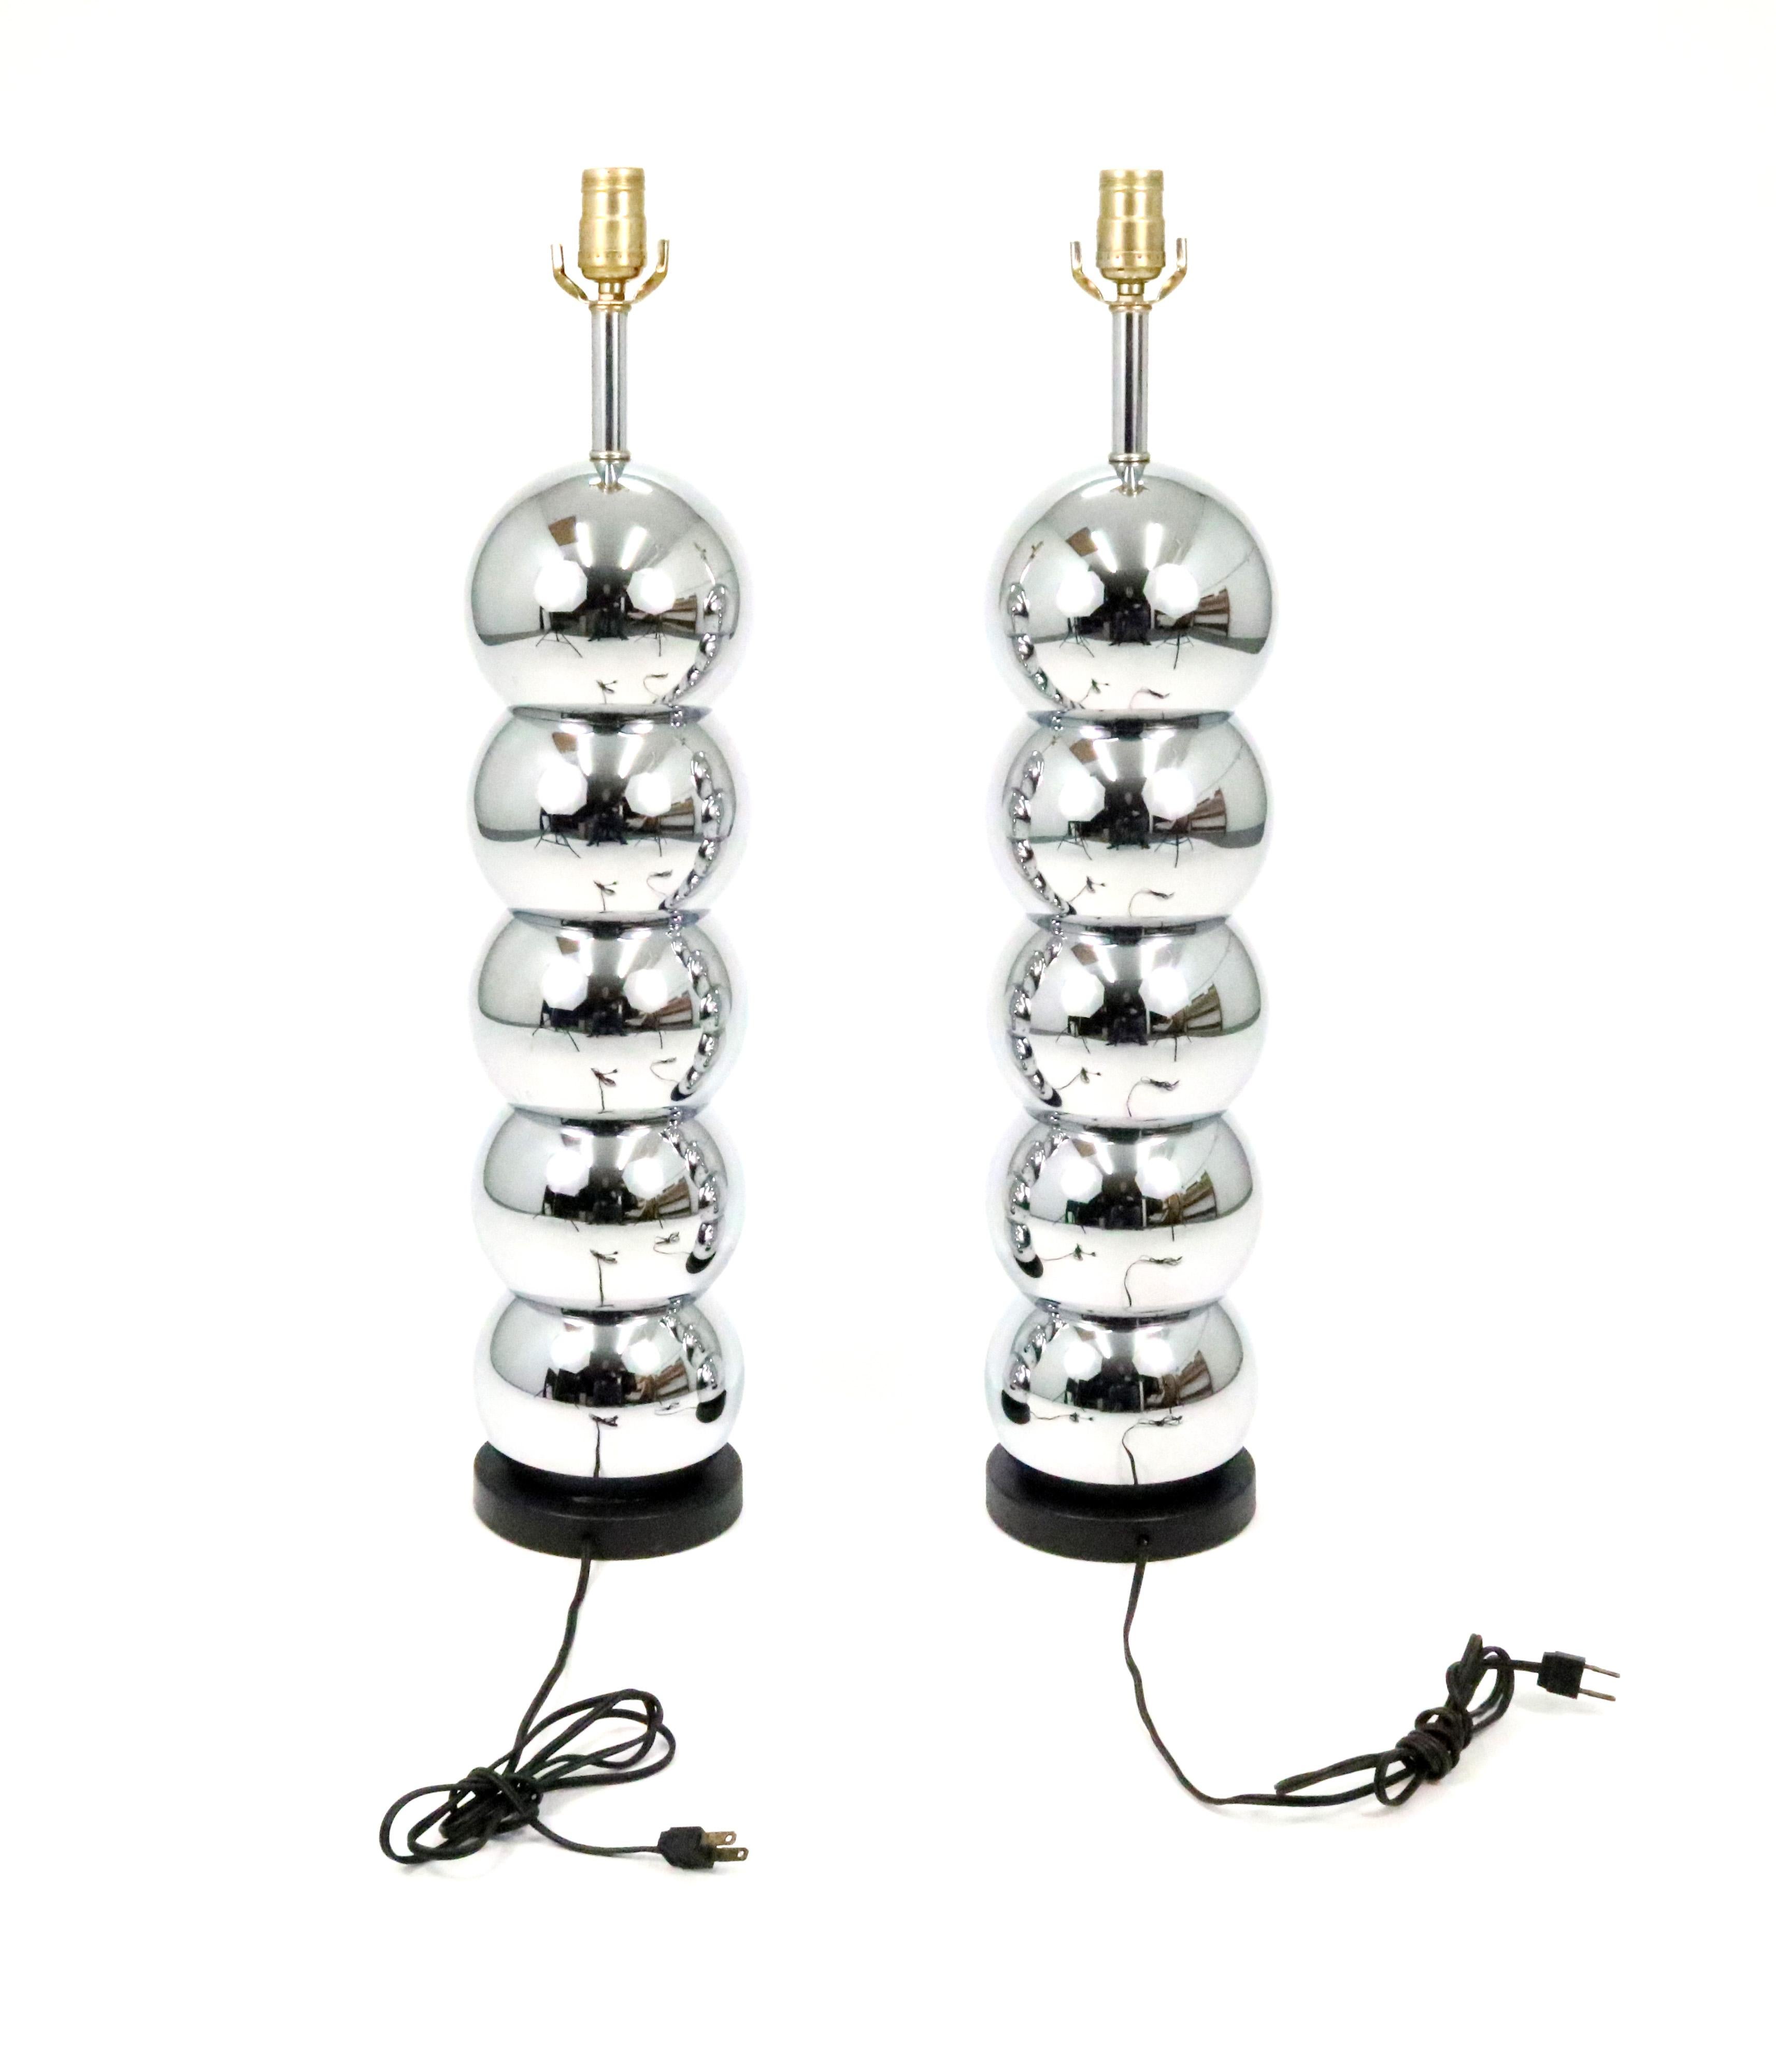 A handsome pair of 5-tier chrome ball lamps in the style of George Kovacs with black cloth shades.

Measure: 26